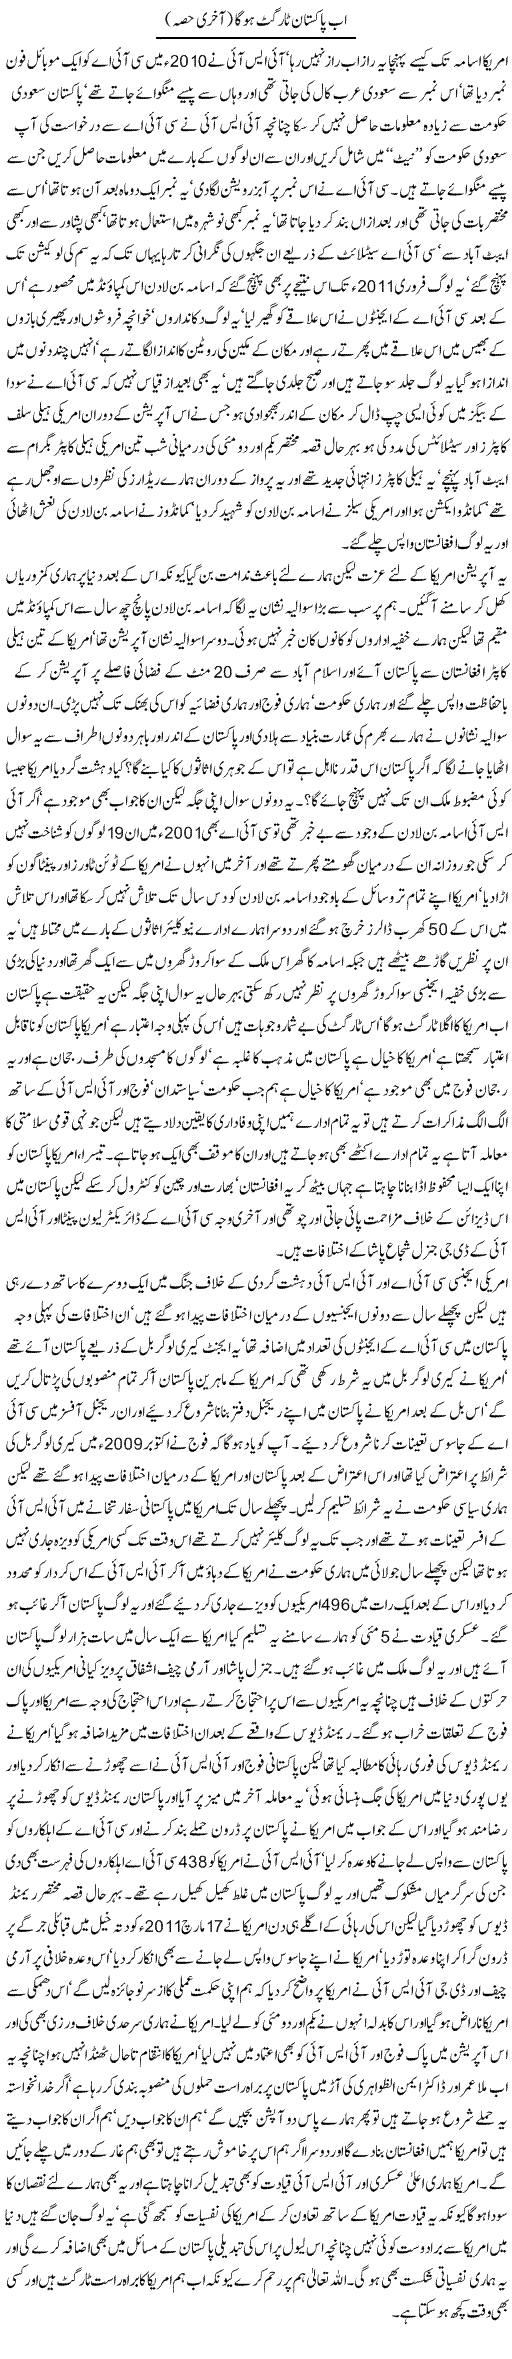 Now Pakistan Is Target Express Column Javed Chaudhry 10 May 2011